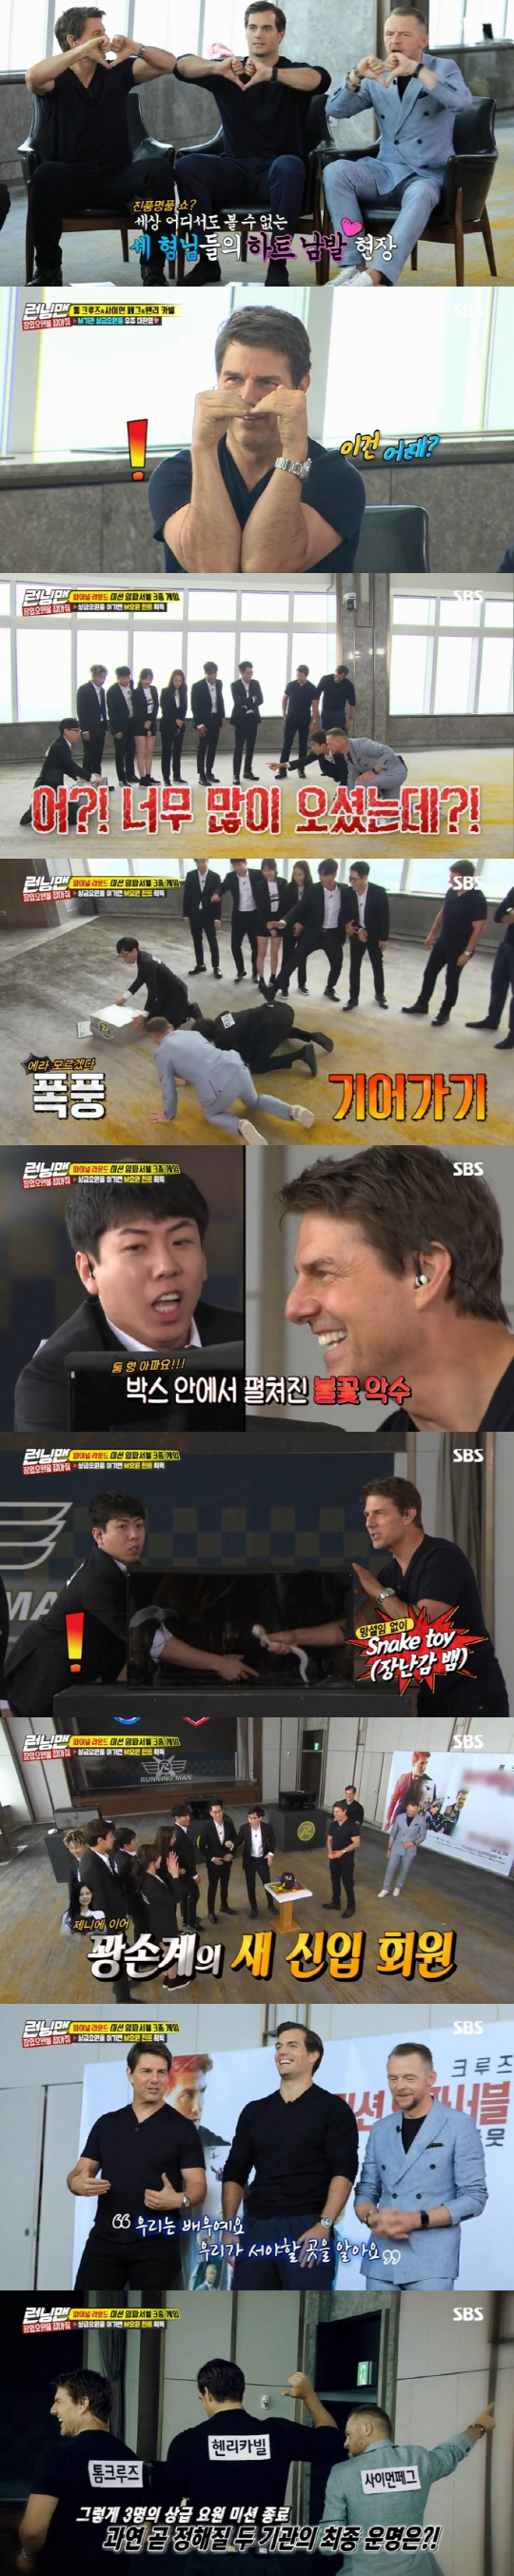 Korean entertainment has adapted perfectly!Tom Cruise, Henry Carville and Simon Pegg, the leading characters in the Hollywood popular blockbuster series Mission Impossible: Fallout (hereinafter directed by Mission Impossible 6 and Christopher Macquarie), have received Korean entertainment with extraordinary wit and sense.In SBS Running Man broadcasted on the afternoon of the 22nd, the second episode of Catch and Project featured by Tom Cruise, Henry Carville, Simon Pegg and Running Man members who visited Korea for Mission Impossible 6 promotion car was broadcast.Starting with Interview with the Vampire (directed by Neil Jordan) in 1994, he visited Korea through Mission Impossible 2 (00, directed by Oussam) Vanilla Sky (01, directed by Cameron Crowe) Operation Name Balkyri (09, directed by Brian Singer) Jack Reacher: Never Go Back (16, directed by Edward Zwick) and became a pro-Navaler One Tom Cruise.His history of his 9th record of Mission Impossible 6 was not disappointed again.Tom Cruise, who appeared in Running Man, one of the prime entertainments on the airwaves weekend, captivated viewers with the agility and sense of the main character of the Mission Impossible series.Of course, Henry Carville and Simon Pegg, another protagonists of Mission Impossible 6, also laughed at the room after finishing the harsh Korean entertainment ceremony.Mission Impossible 6, which did not spare any trouble in appearing in Running Man even though it was a limited recording time.They gave fun to the finger hearts as well as the dissimilars among the team members, and they showed their passion by throwing their whole body in iron bag quiz and mystery box game.In particular, the games New Stiller was Simon Pegg, who showed off his knee-walking and various foul skills to win the game.), which made Yoo Jae-seok nervous, he emerged as Hollywood Lee Kwang-soo and made viewers navel.Tom Cruise, Henry Carville and Simon Pegg of Mission Impossible 6, which have proved that there is no mission that can be completely adapted to Korean entertainment.Because of the three peoples performance, Running Man ranked first with 7.1% of the first part and 10% of the second part (based on Nielsen Korea), surpassing MBCs Masked Wang (9.7%) and KBS2s Happy Sunday (8.2%).Above all, the ratings of Running Man have been explosive for four months since March, setting the record for the second highest audience rating this year.Meanwhile, Mission Impossible 6 is an action blockbuster that must end the inevitable mission as the choice of all good wills made by top spy agent Ethan Hunt and the IMF team returns to the worst result.Tom Cruise, Henry Carville, Simon Pegg and Rebecca Ferguson added and director Christopher Macquarie, who directed Mimira, Mission Impossible: Lognation and Jack Rikcher, caught the megaphone.It will be released for the first time in Korea on the 25th.